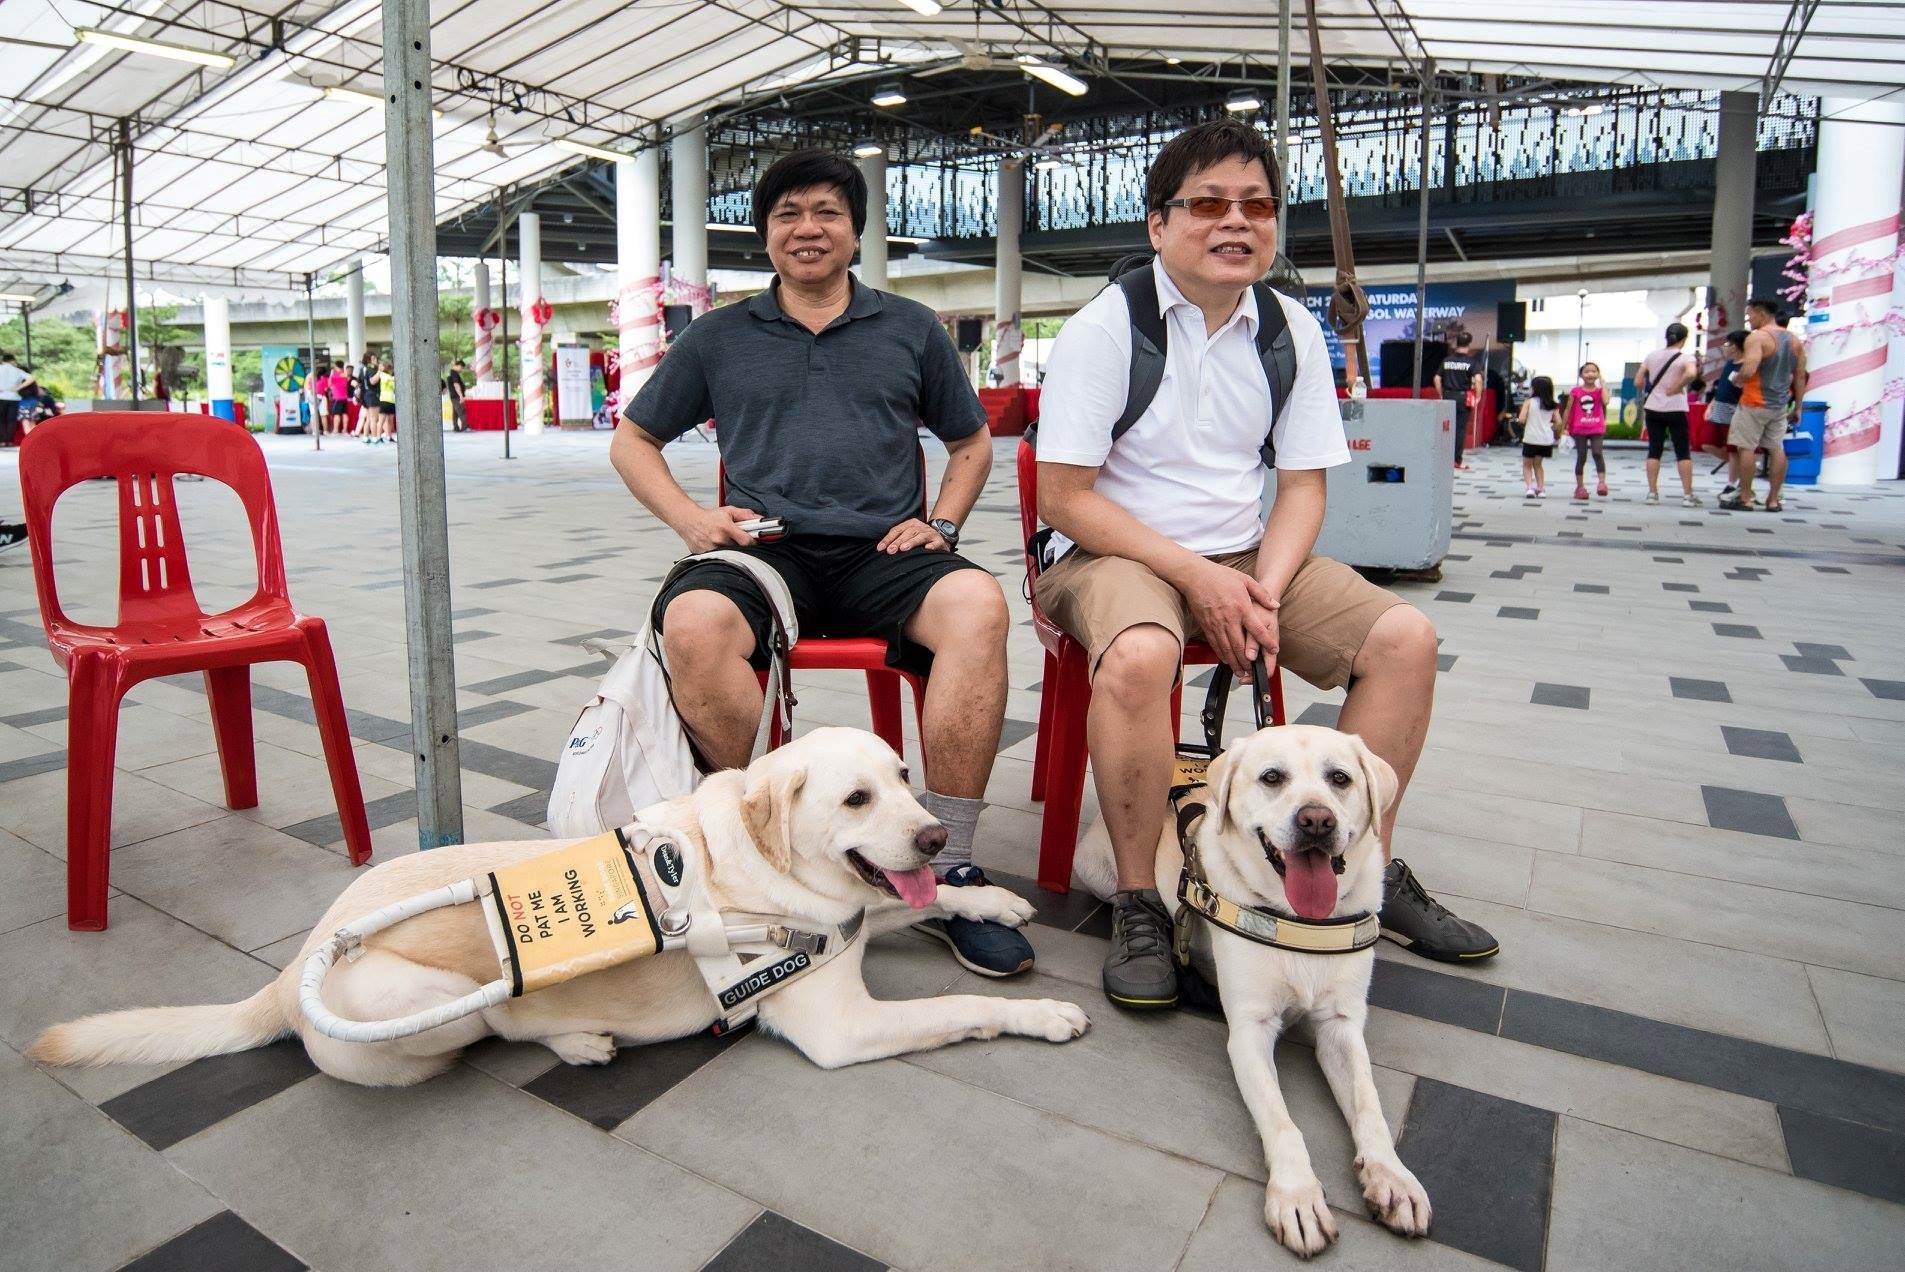 Celebrate International Guide Dog Day (IGDD) with Guide Dogs Singapore